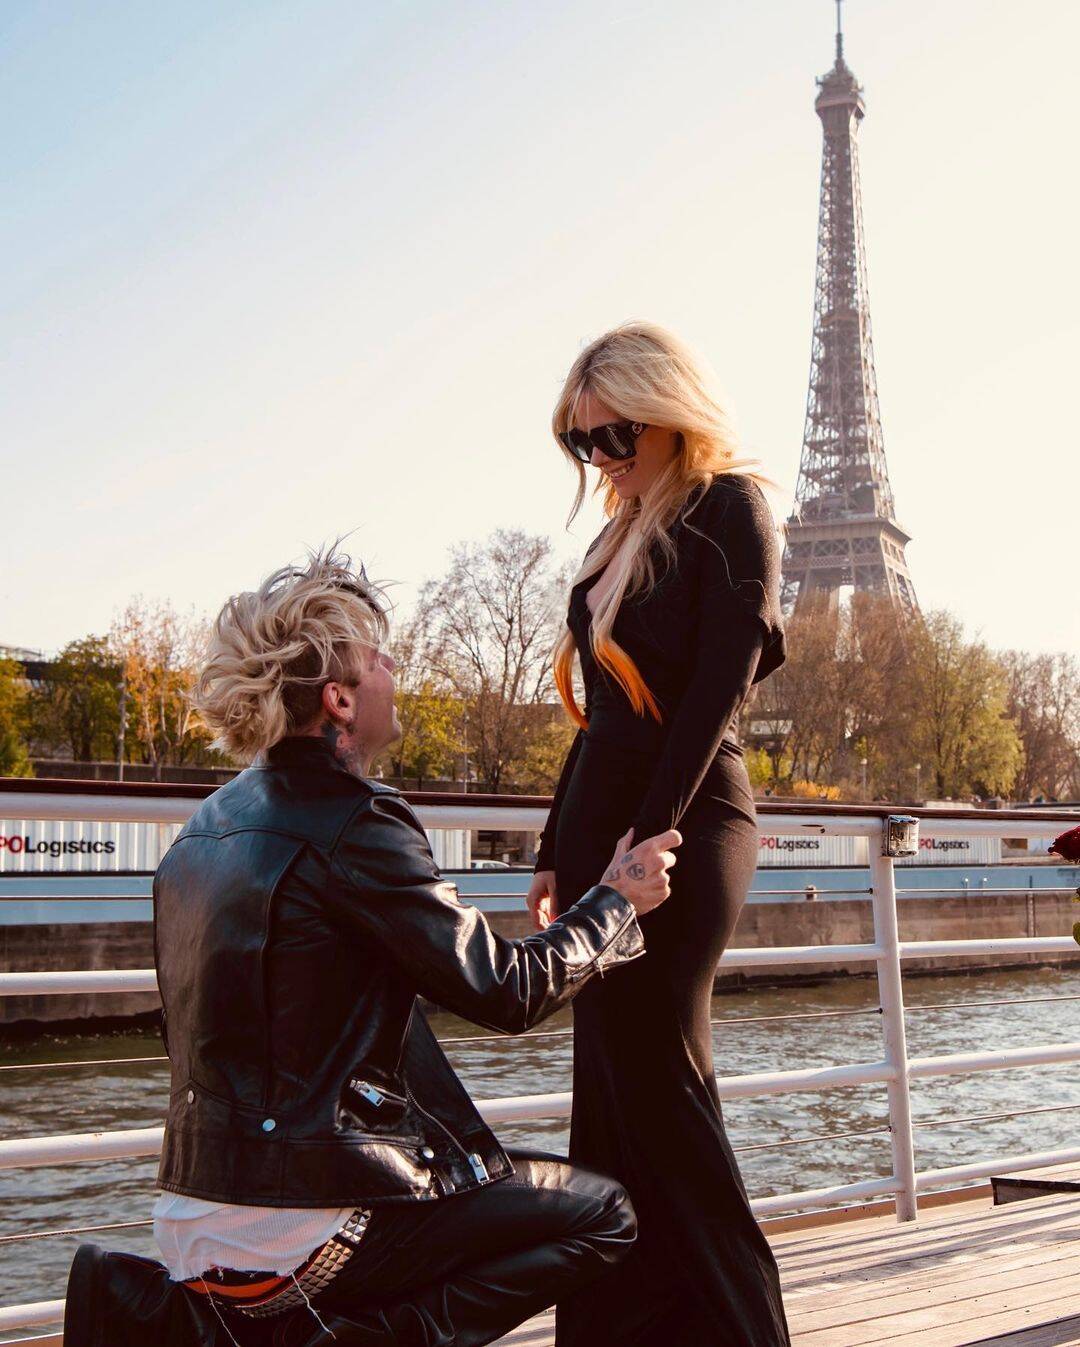 The proposal took place in the Eiffel Tower. (Photo: Instagram)